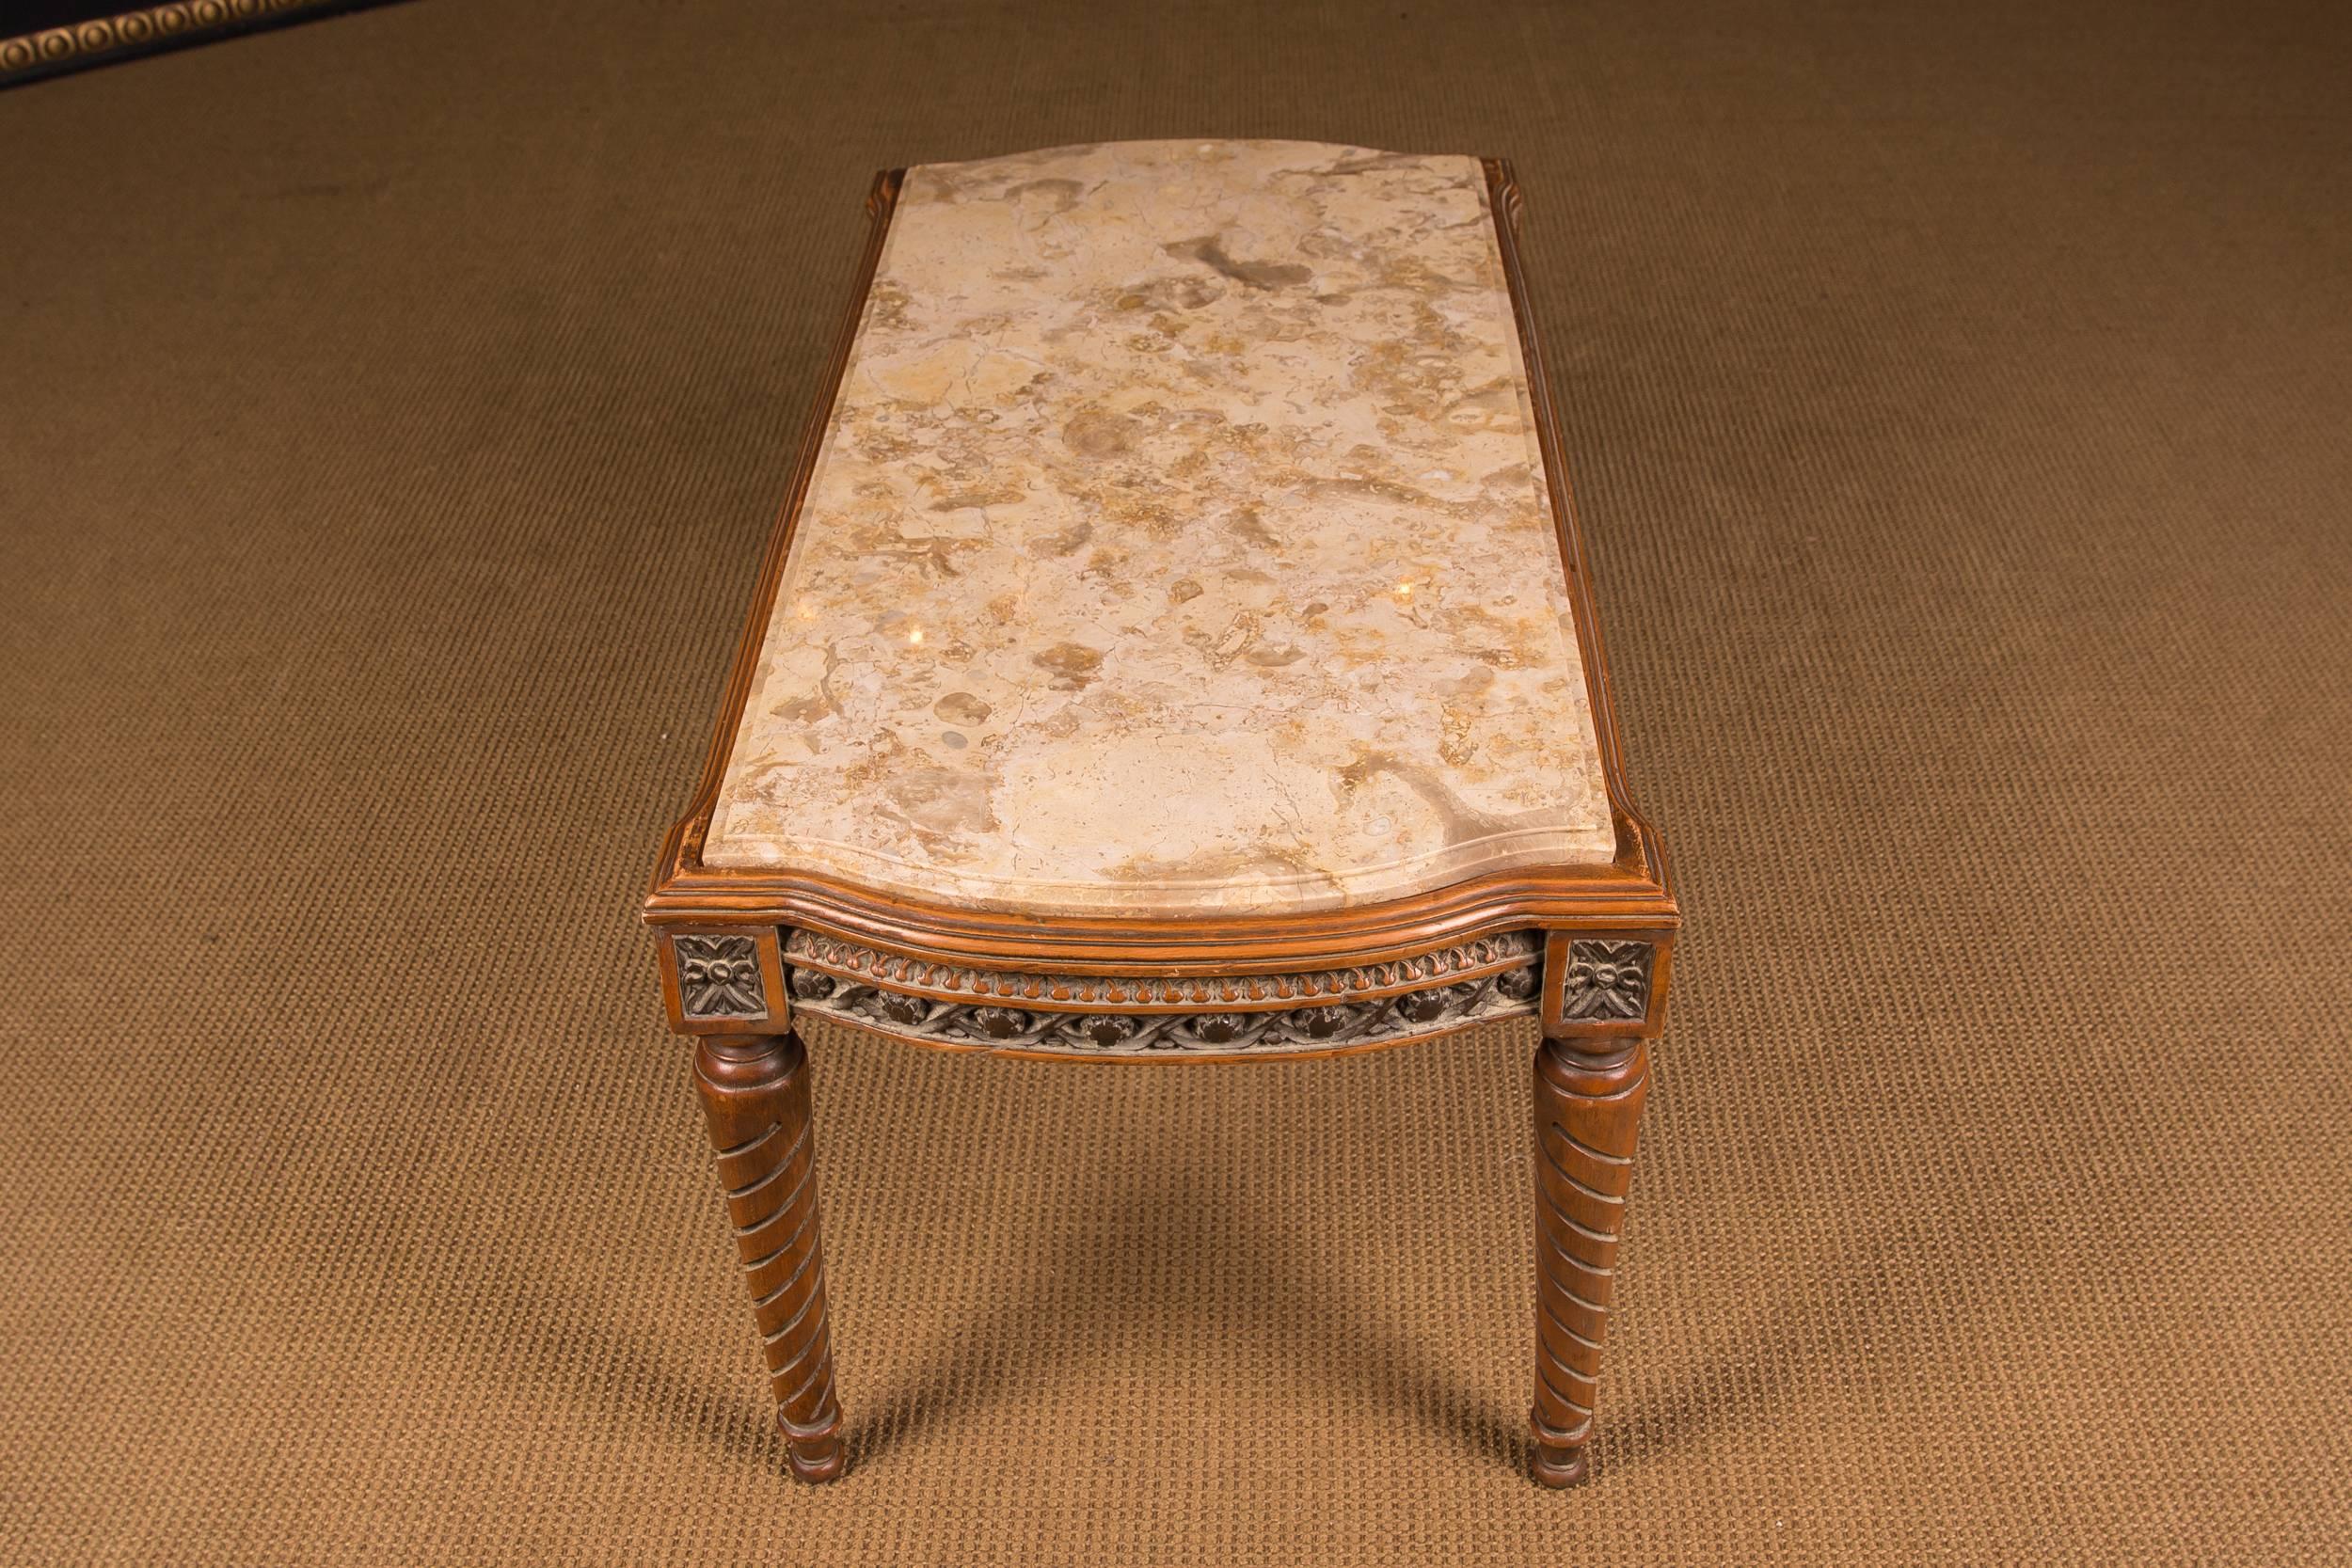 High Quality Table with Marble Top in Louis Seize Style (20. Jahrhundert)